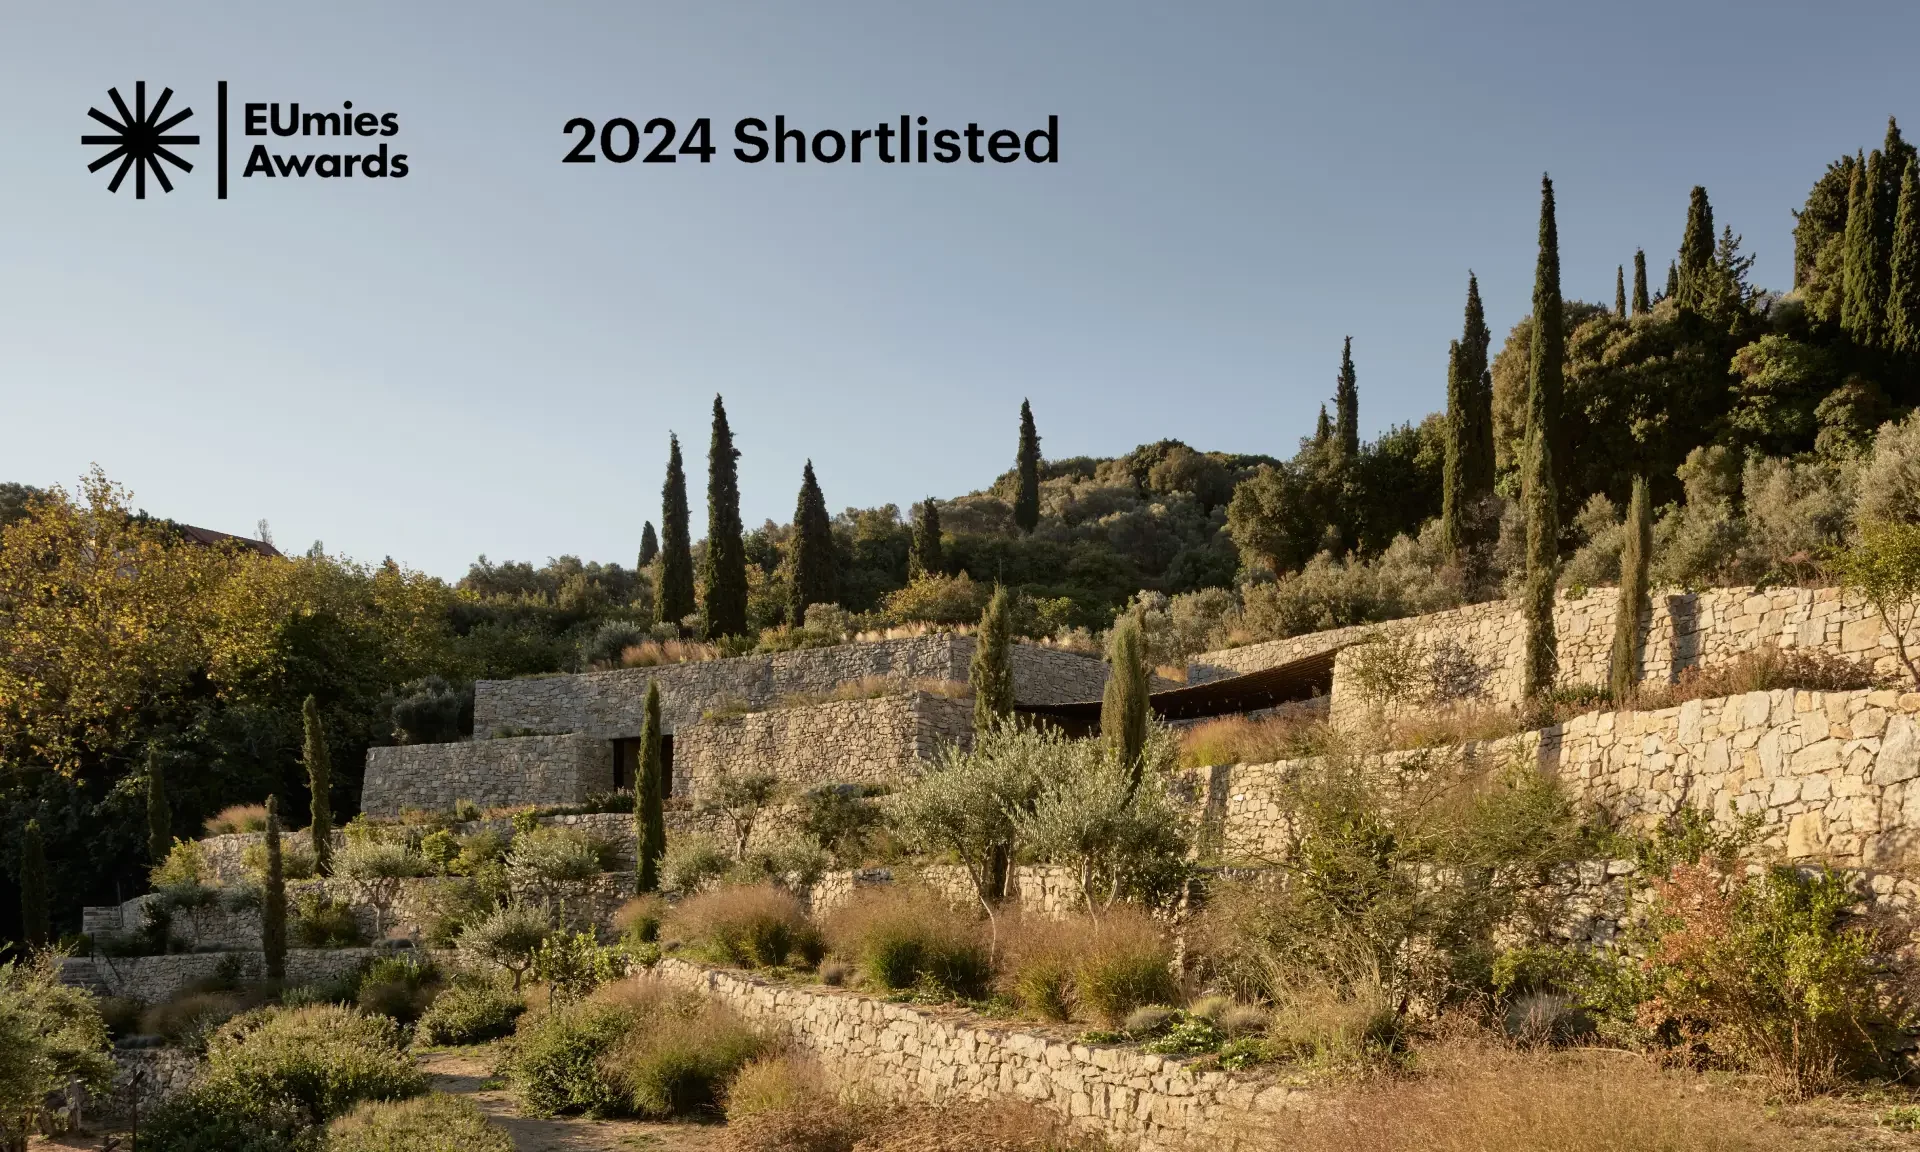 Liknon Shortlisted in EU Mies Awards